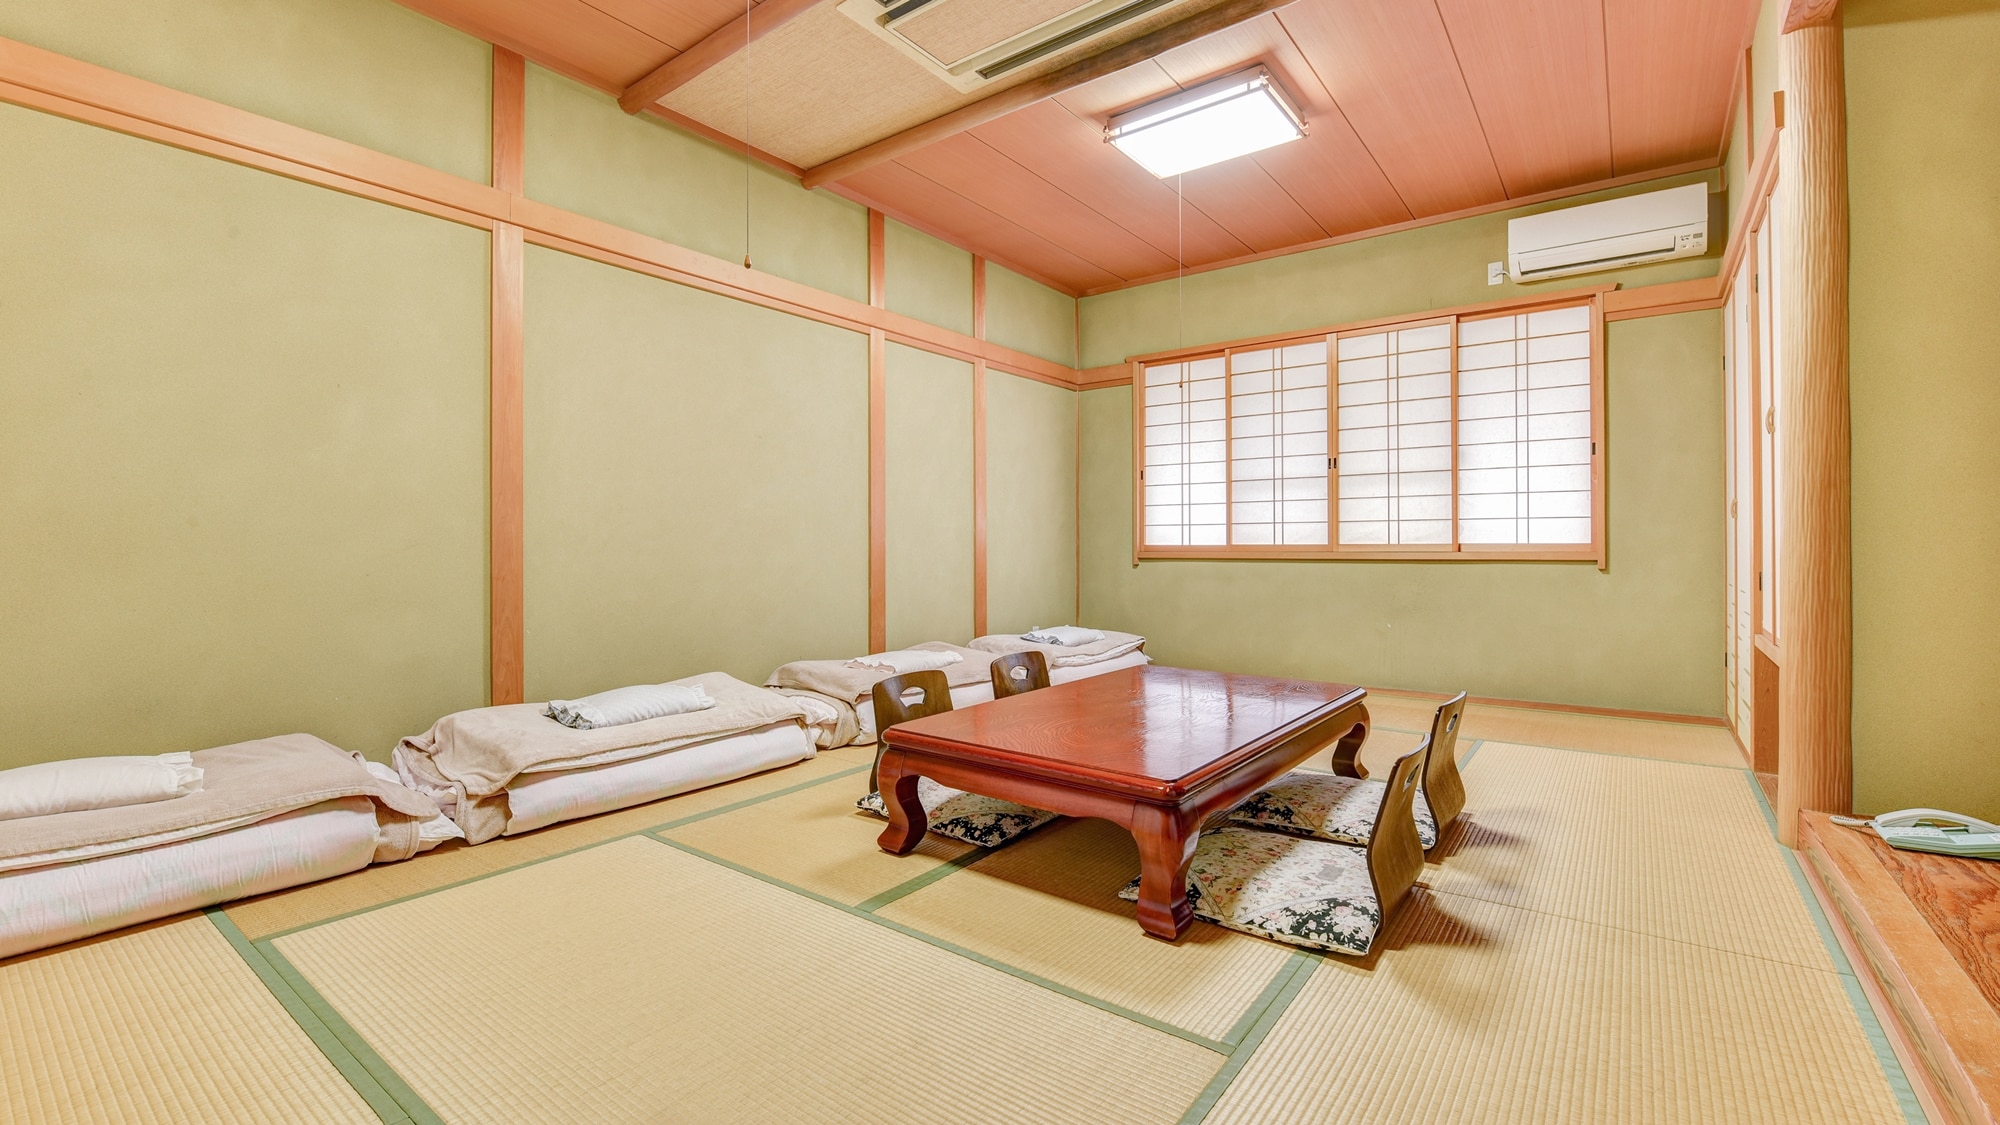 * Japanese-style room 12 tatami mats / Pure Japanese-style guest room has an elegant and calm atmosphere. Please spend a relaxing time in a family or group.